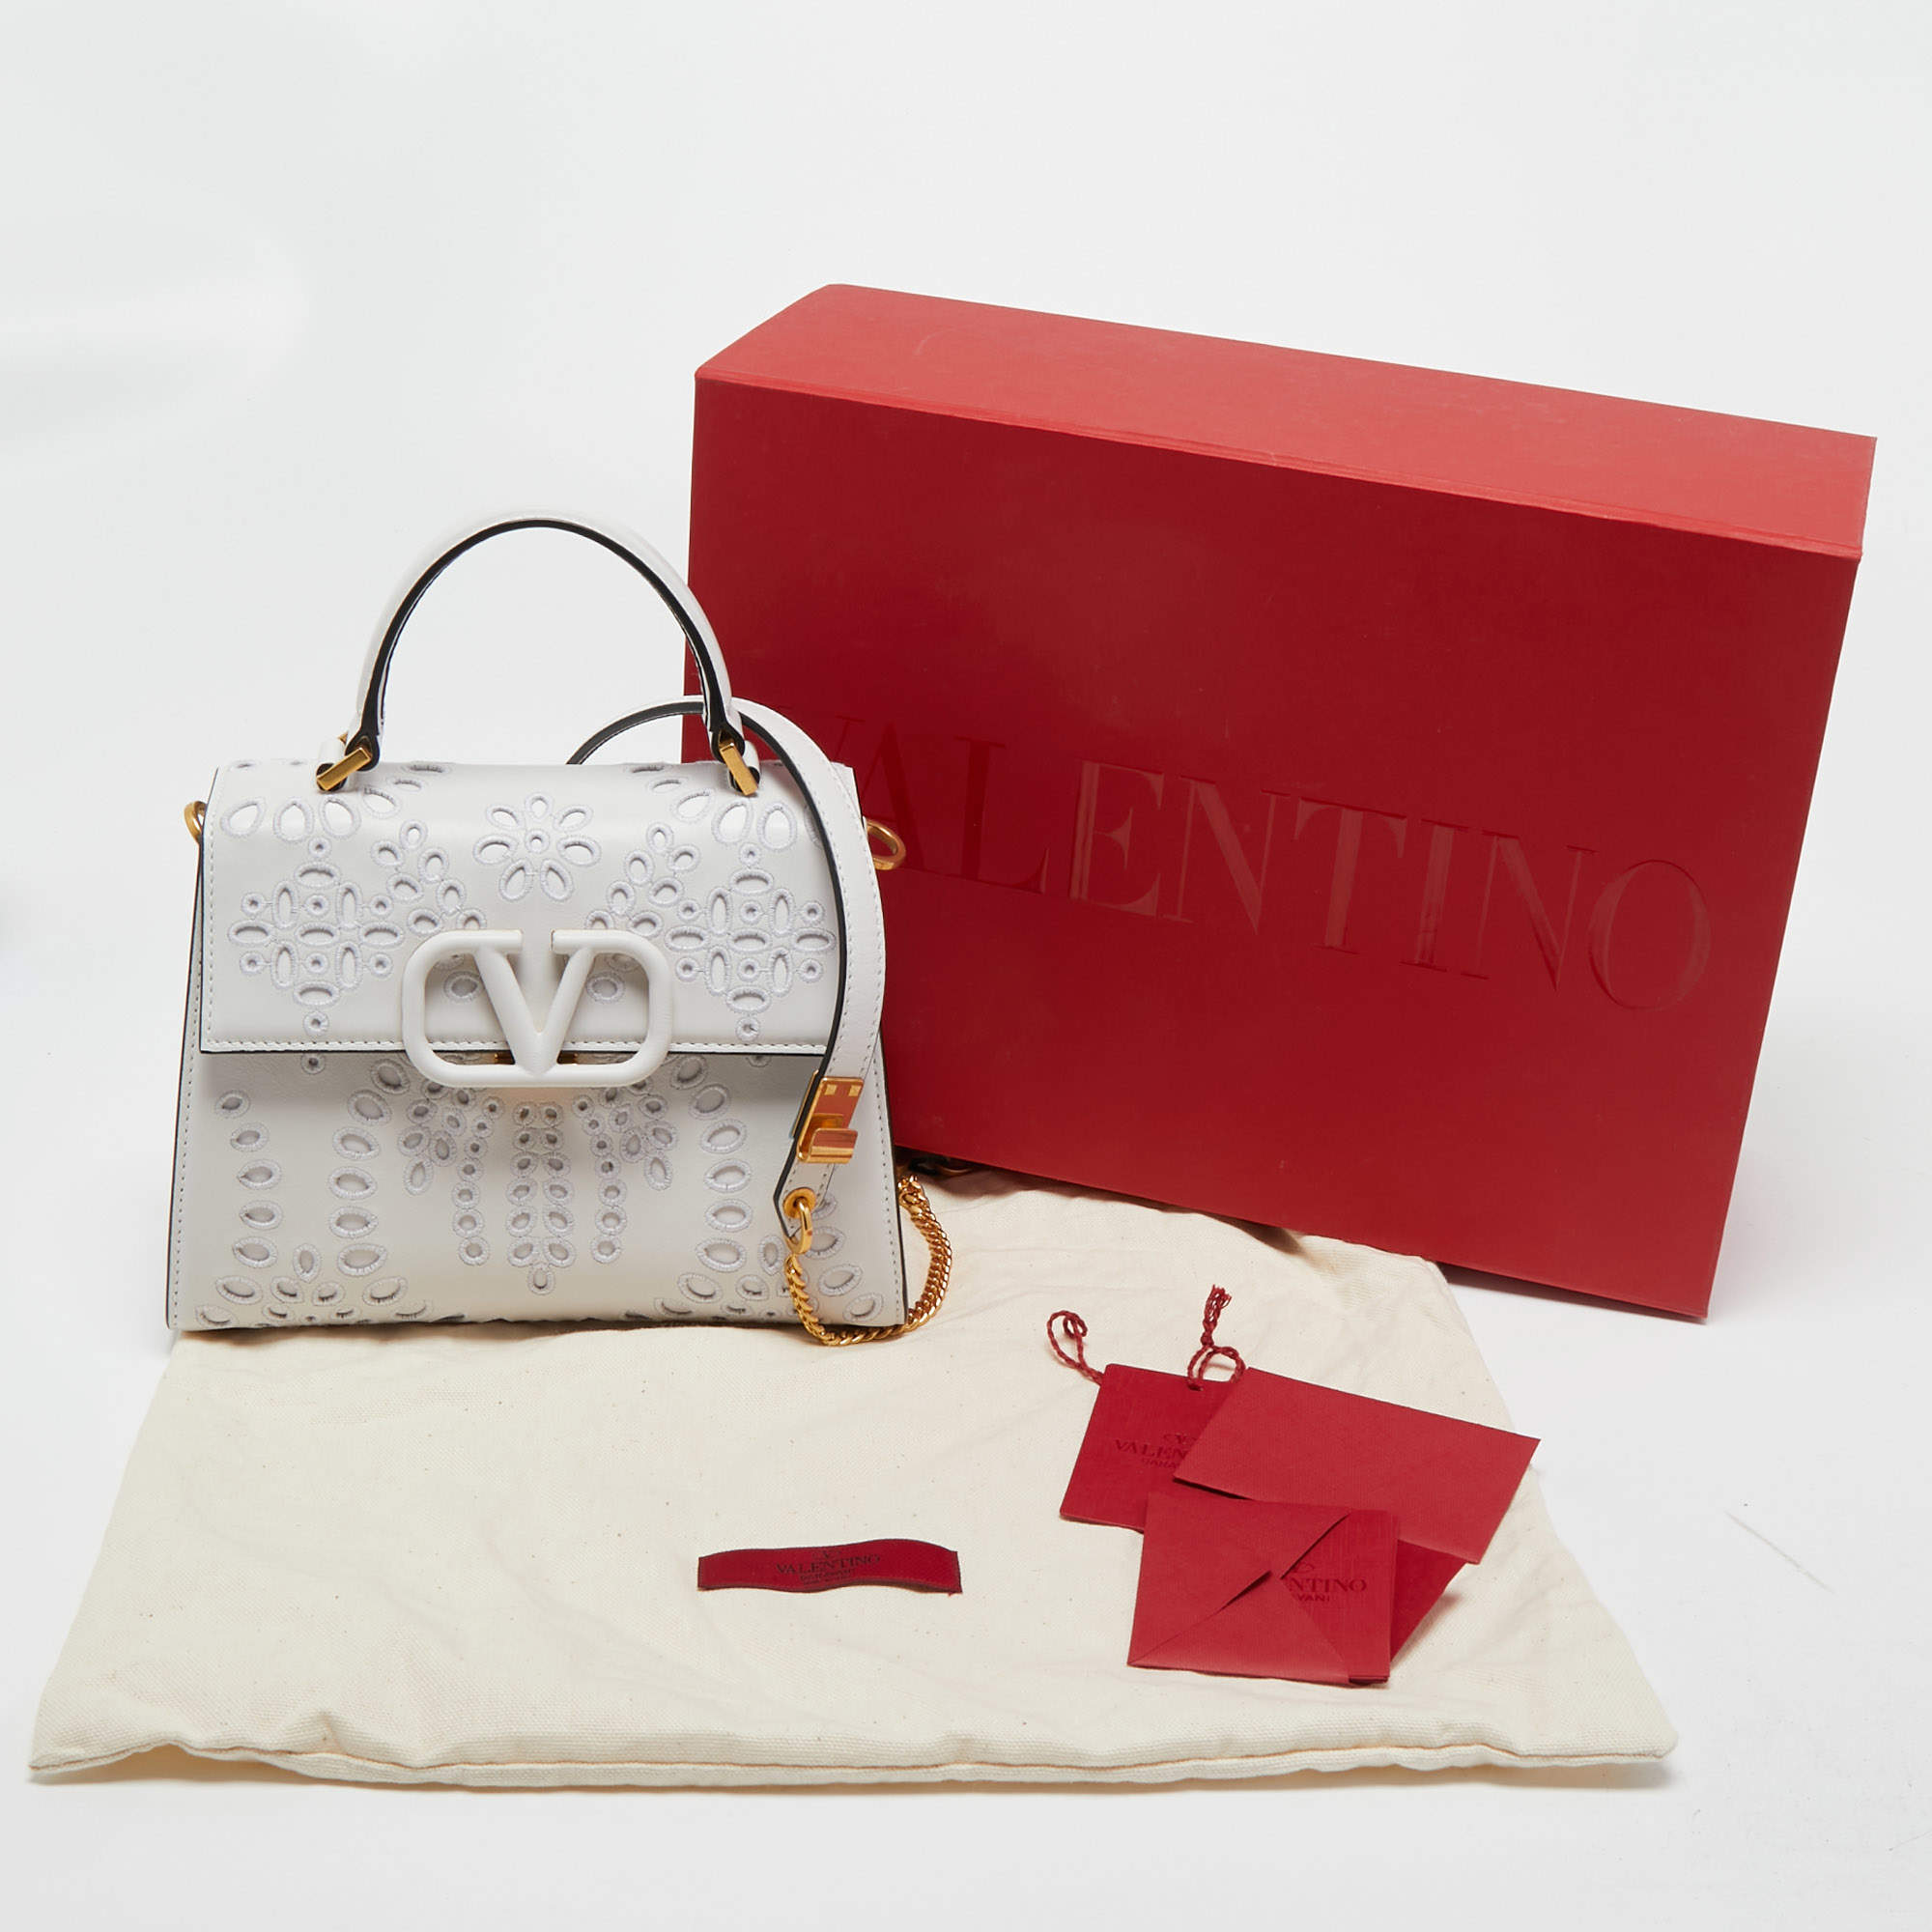 Small Vsling Handbag In Calfskin With San Gallo Embroidery by